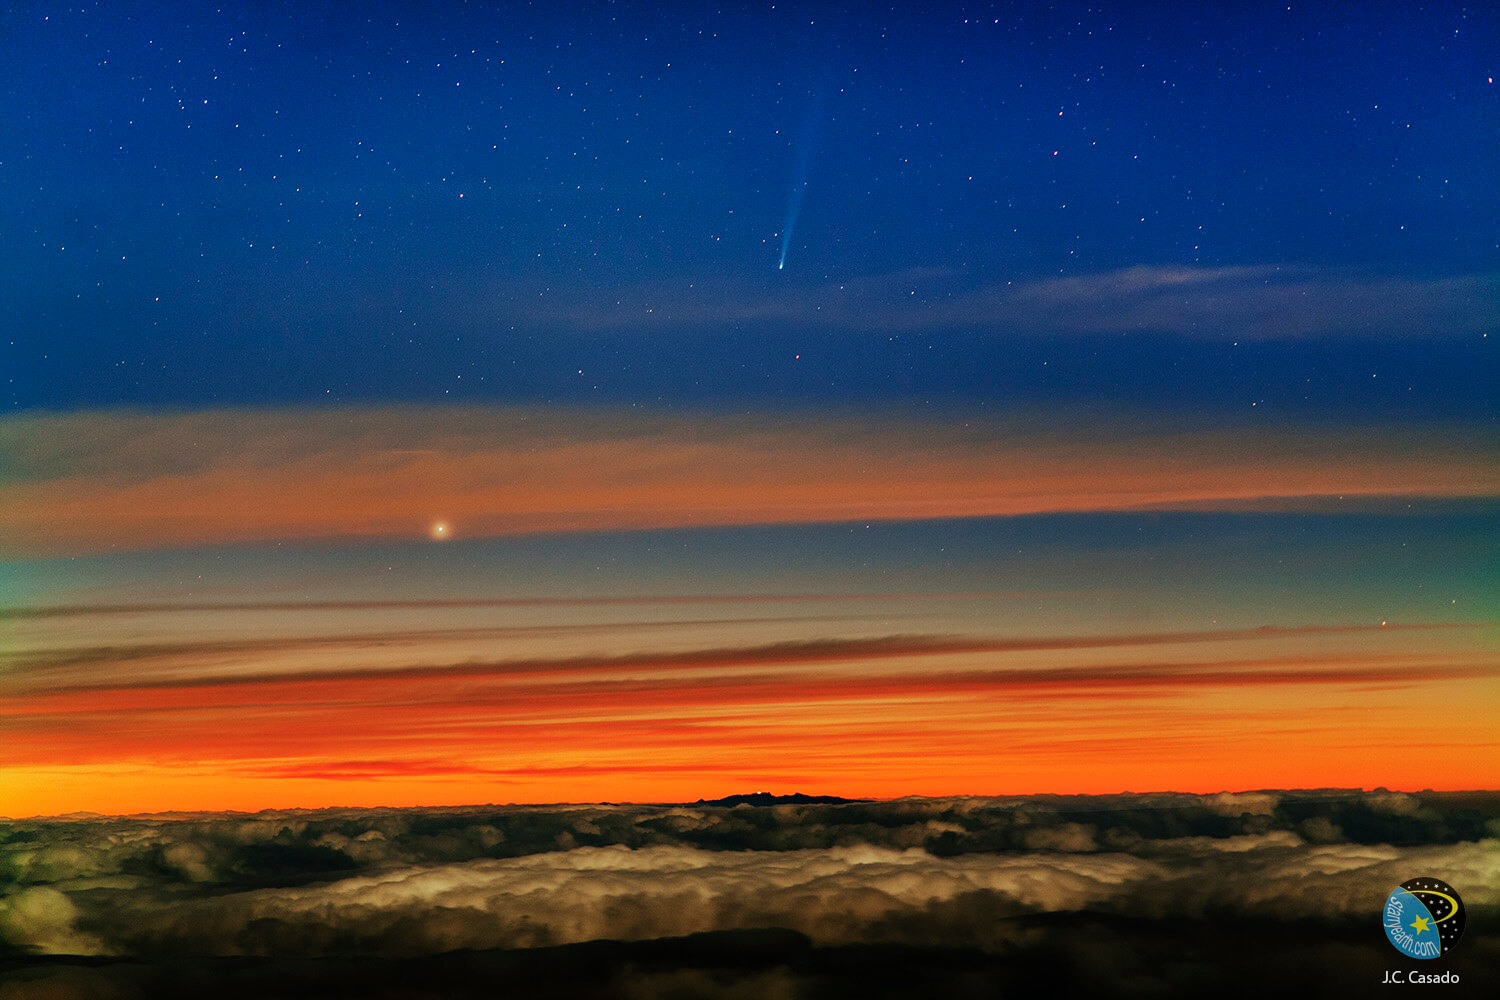 Comet Ison and the planet "Hama" in the early morning just before sunrise in the sky of the Canary Islands, Spain.